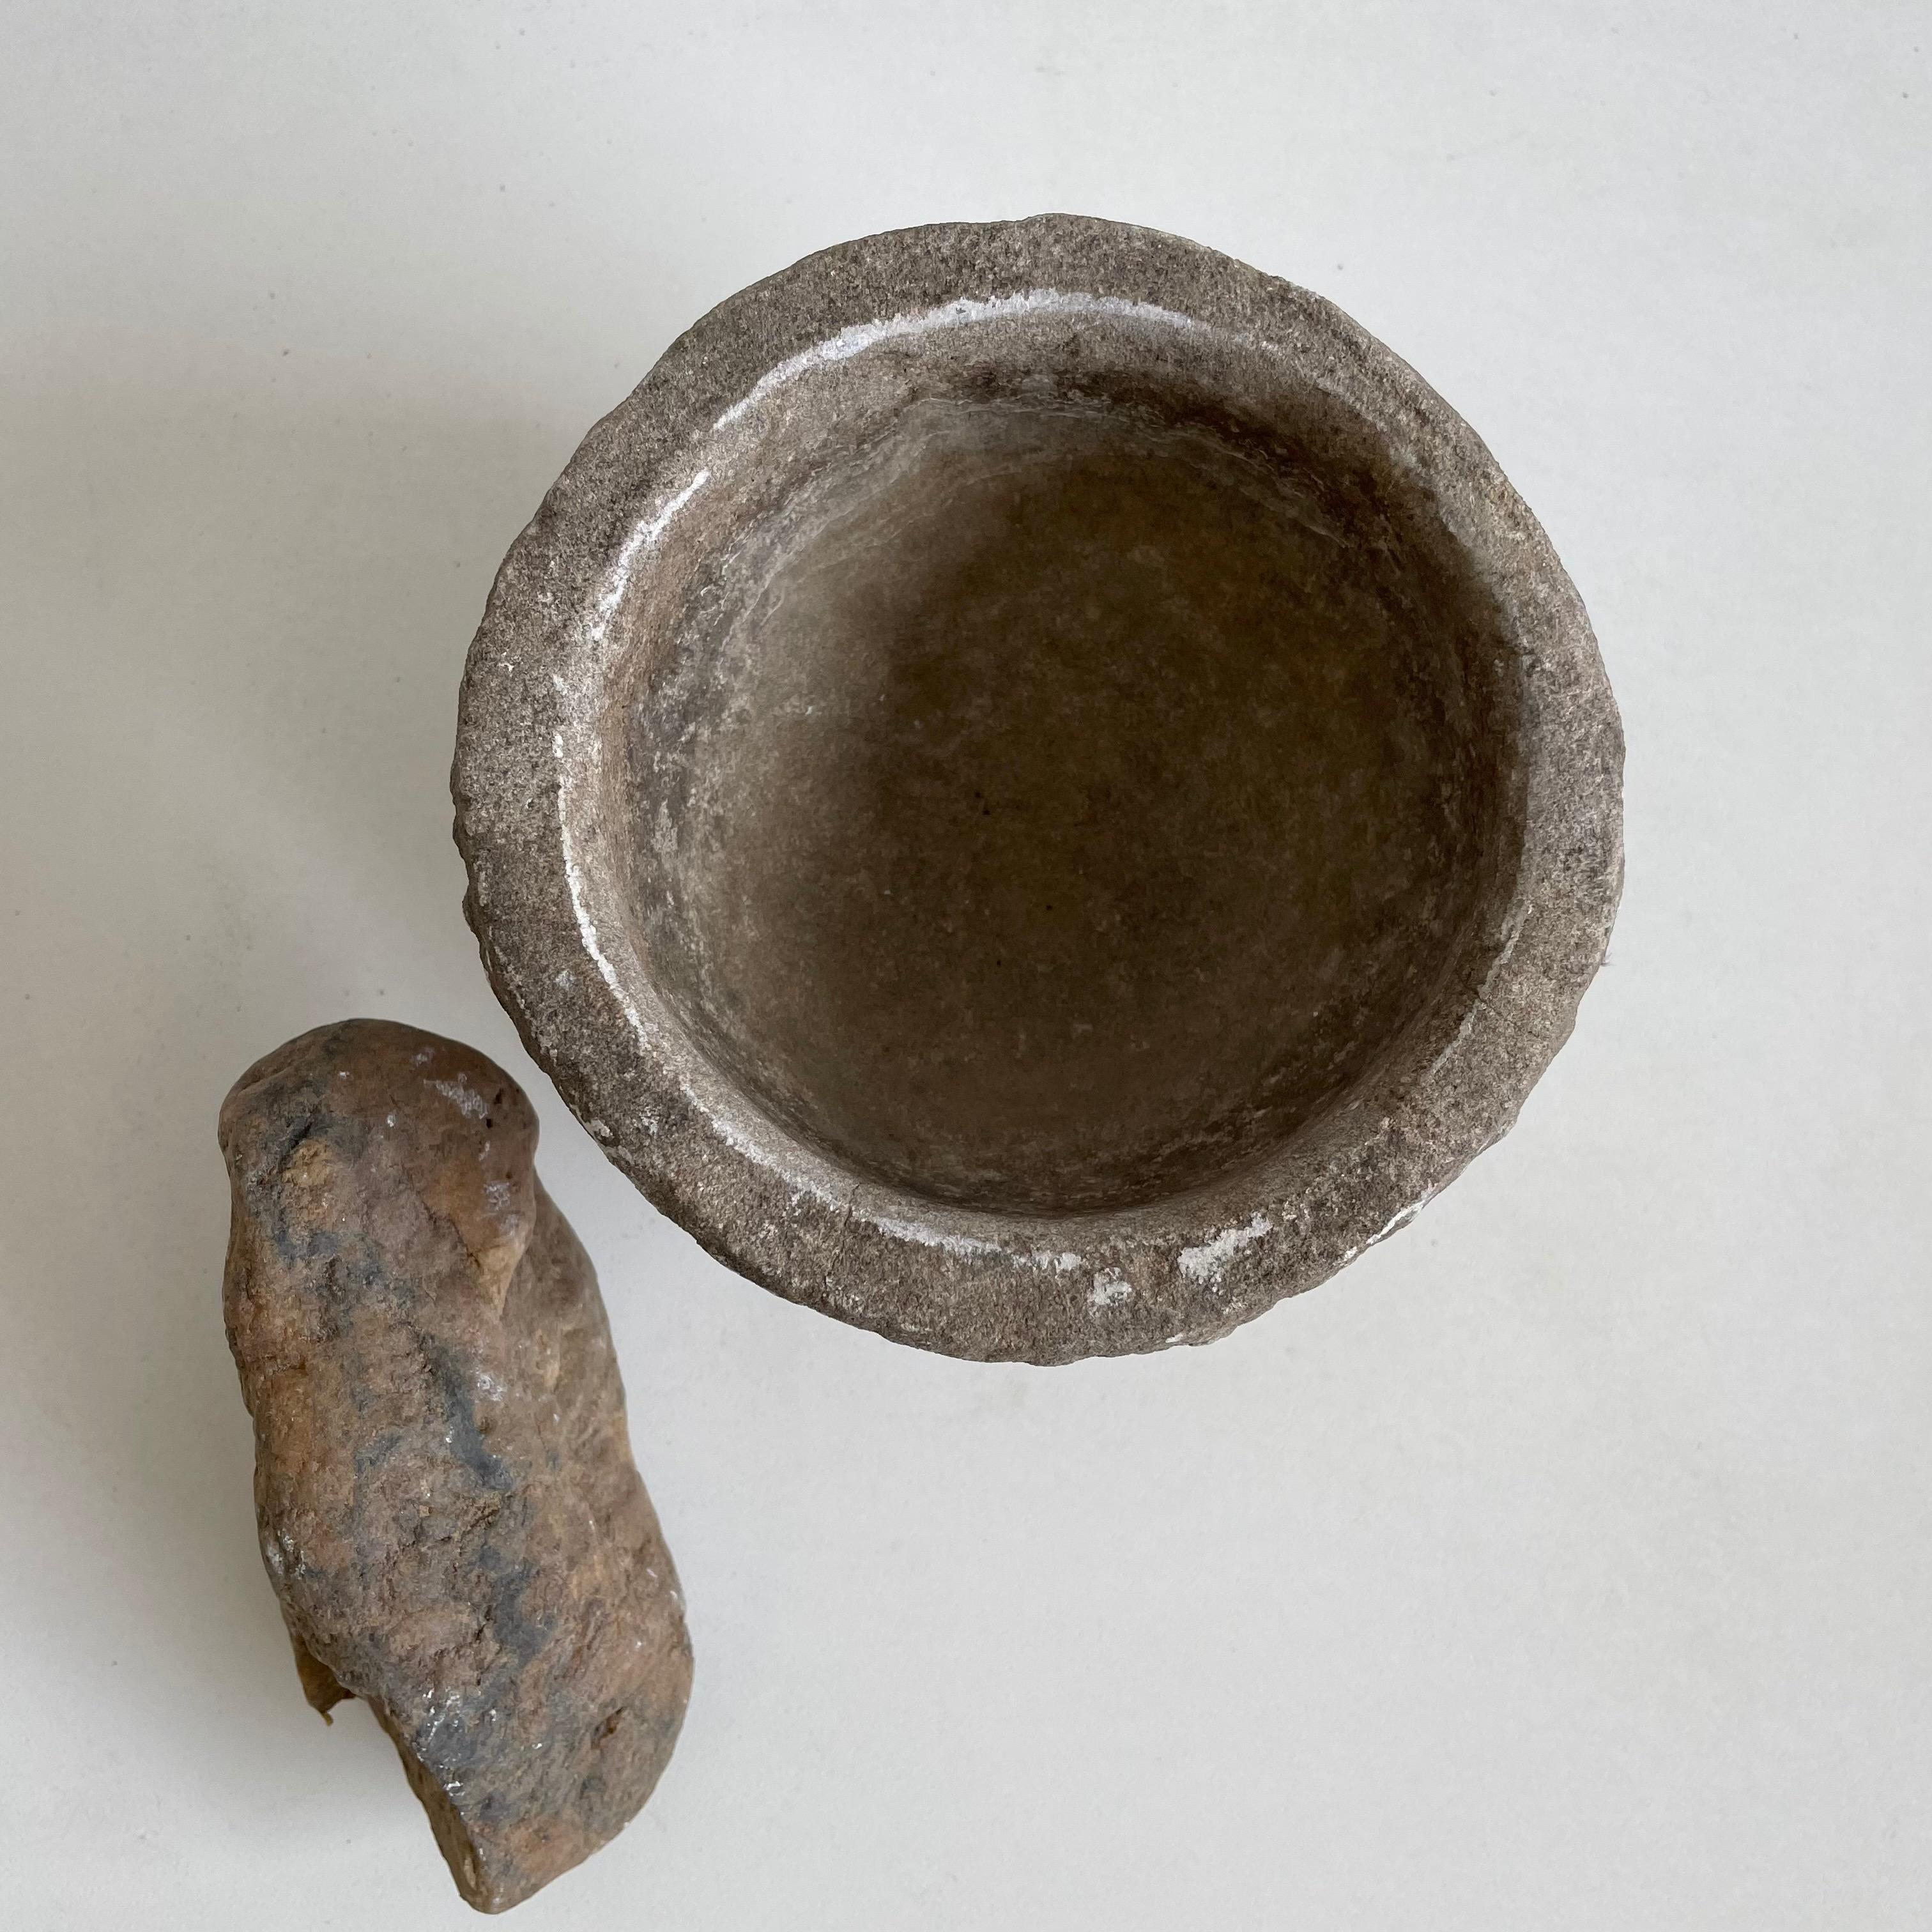 Antique stone mortar and pestle bowl set, great decorative item, or can be used.
Accessories not included
Size: 5 x 5 x 4.